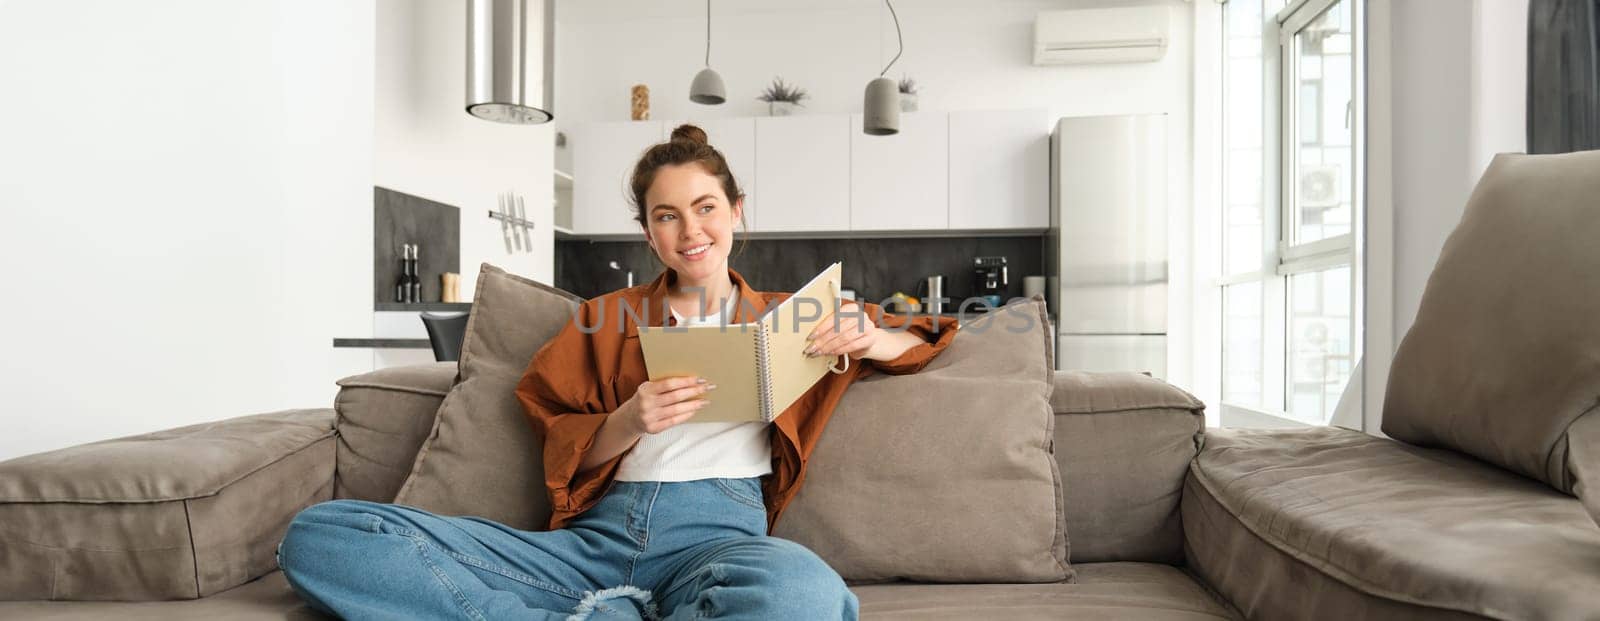 Young woman sits at home on sofa, reading her notes, holding notebook, studying for exam, student revising in her living room.